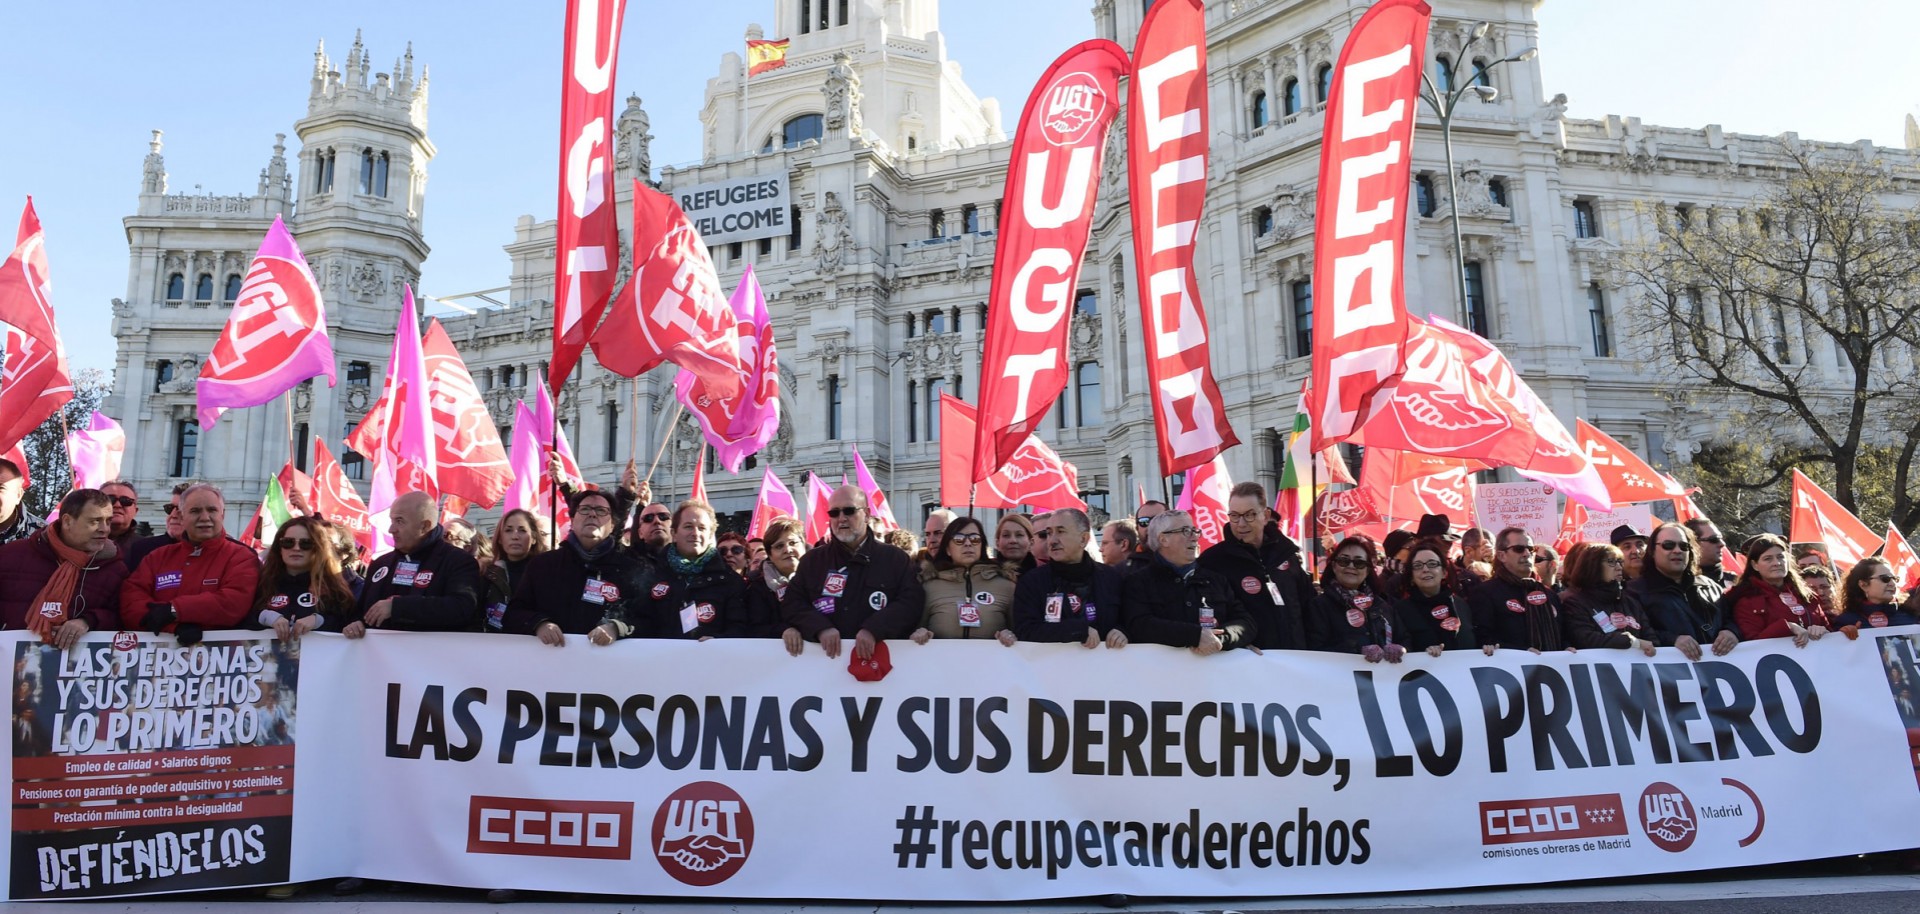 Unemployment protests in Spain